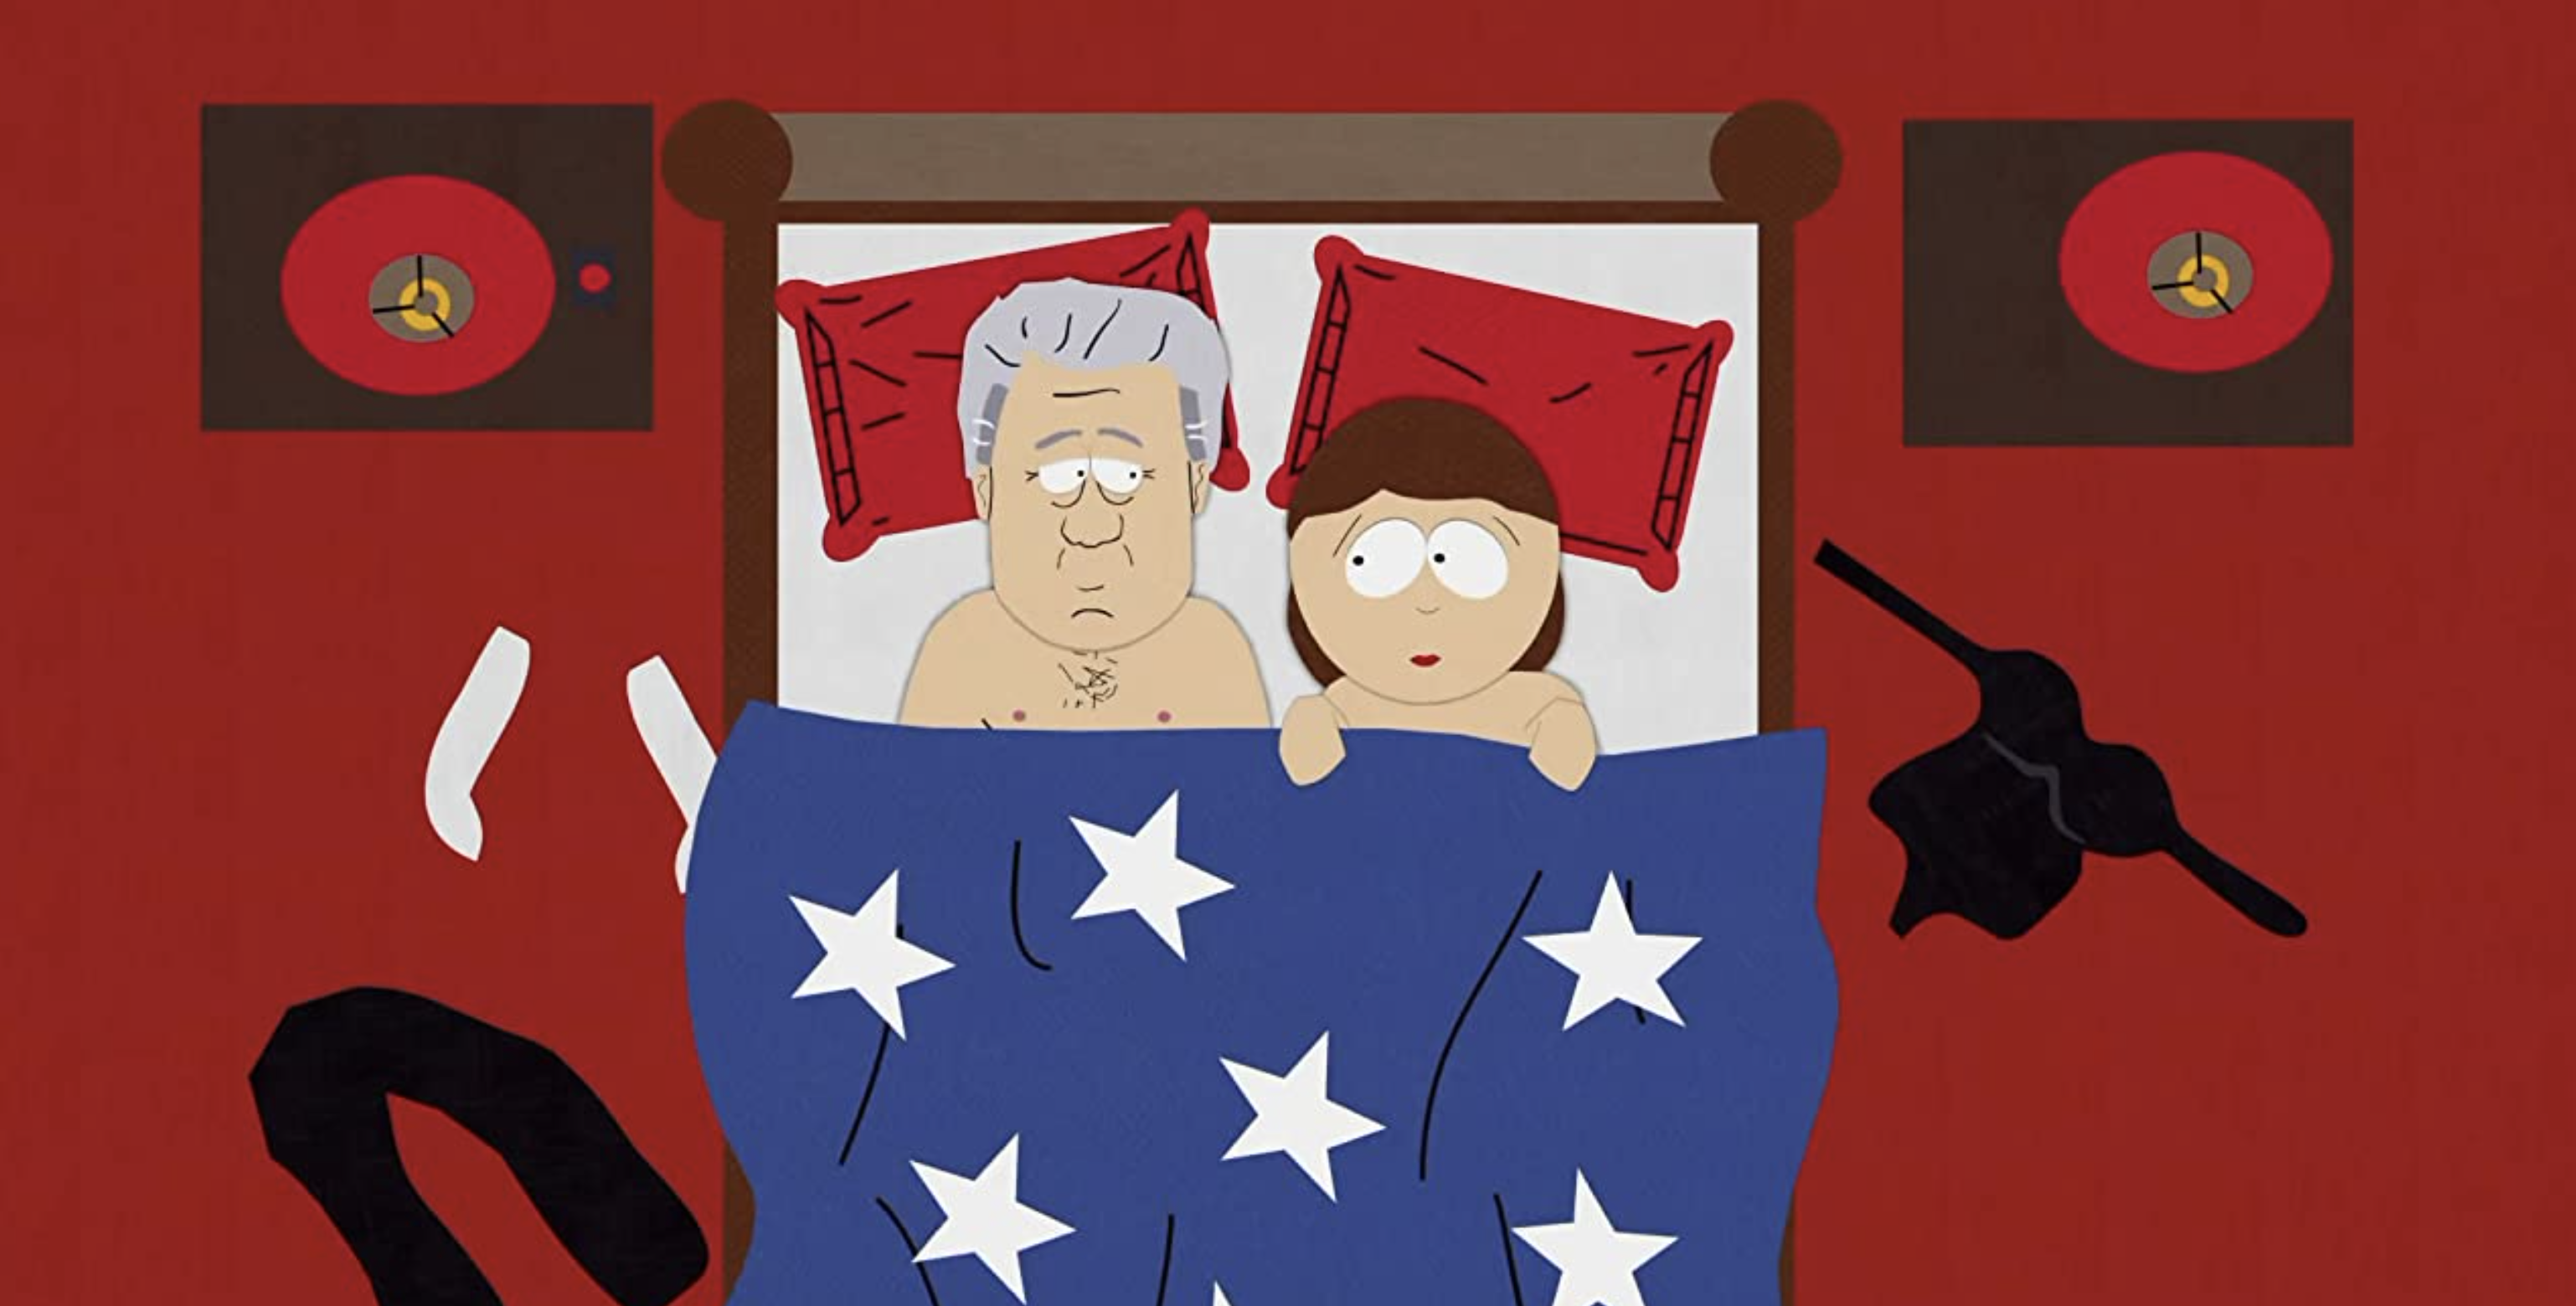 Goin’ Down to South Park Guide S 2 E 2 ‘ Cartman’s Mom is Still a Dirty Slut’